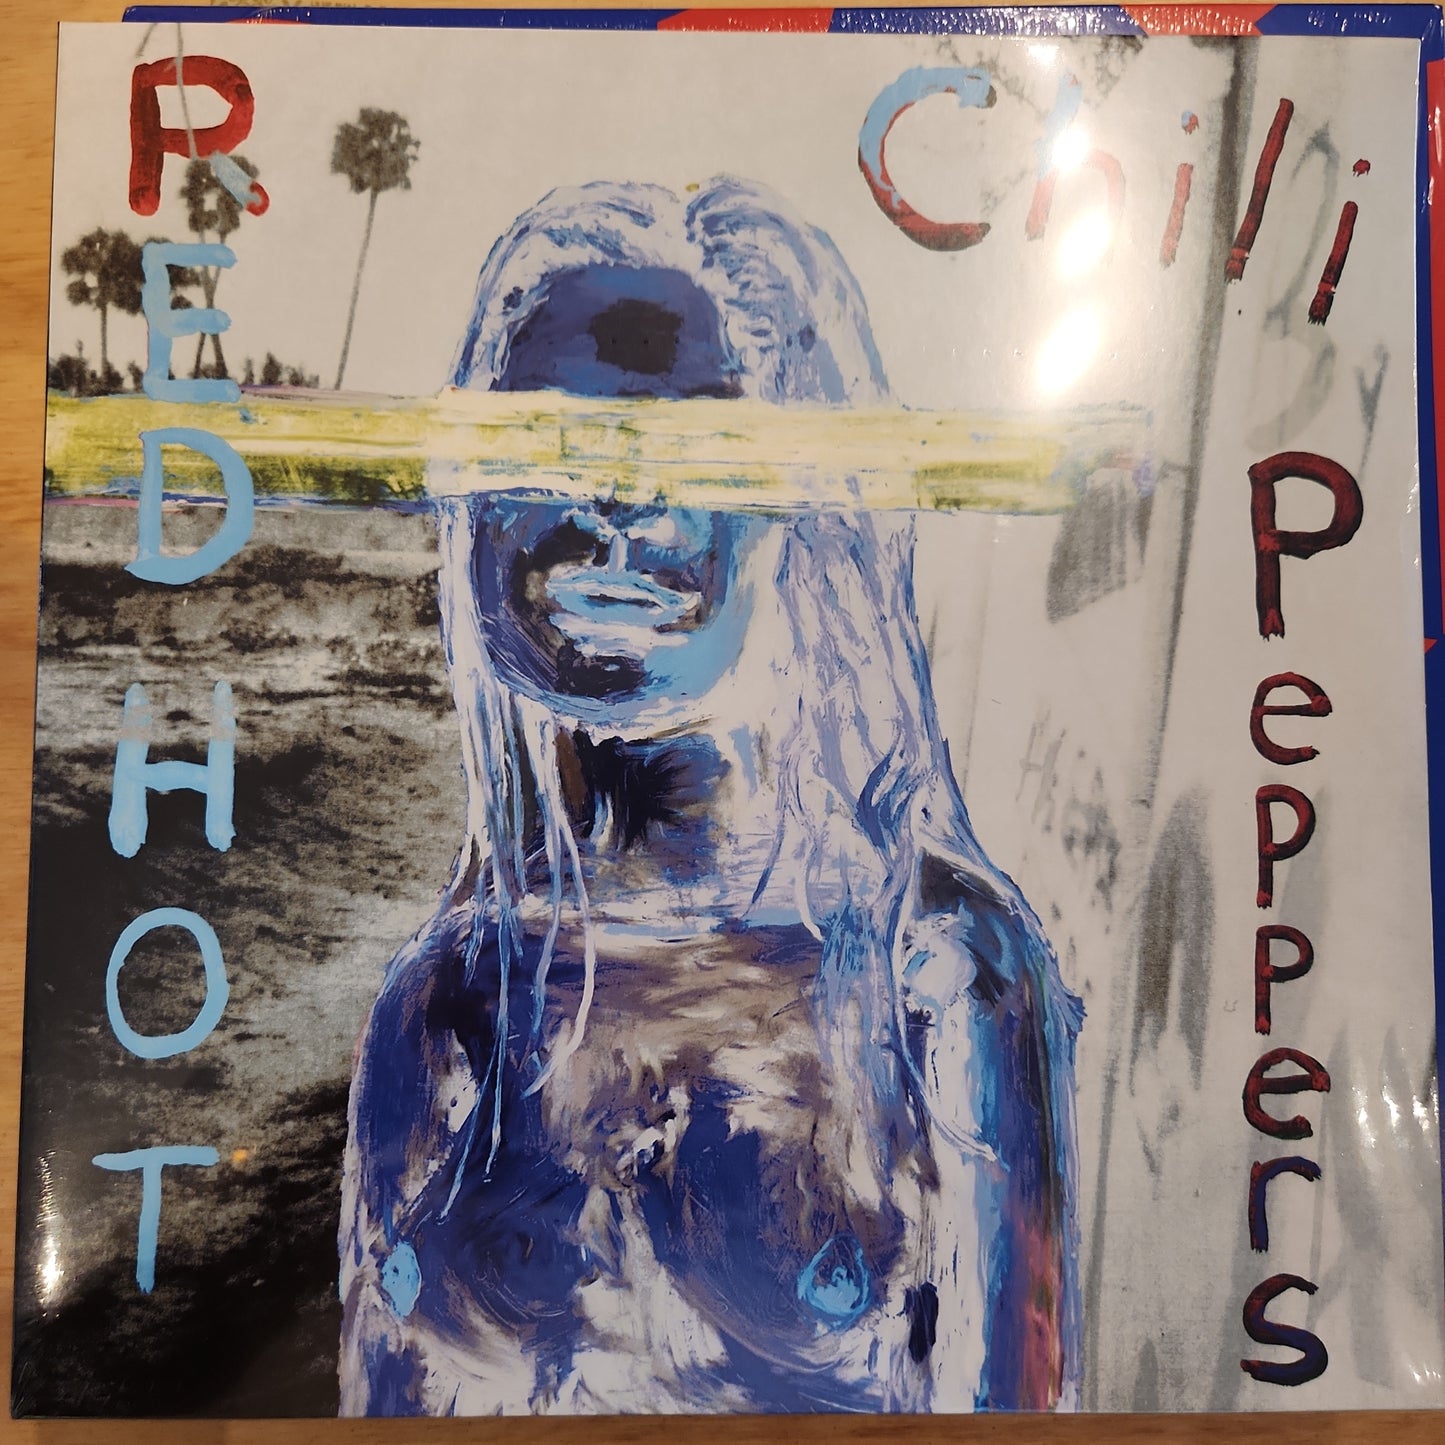 Red Hot Chilli Peppers - By the Way - Double Vinyl LP